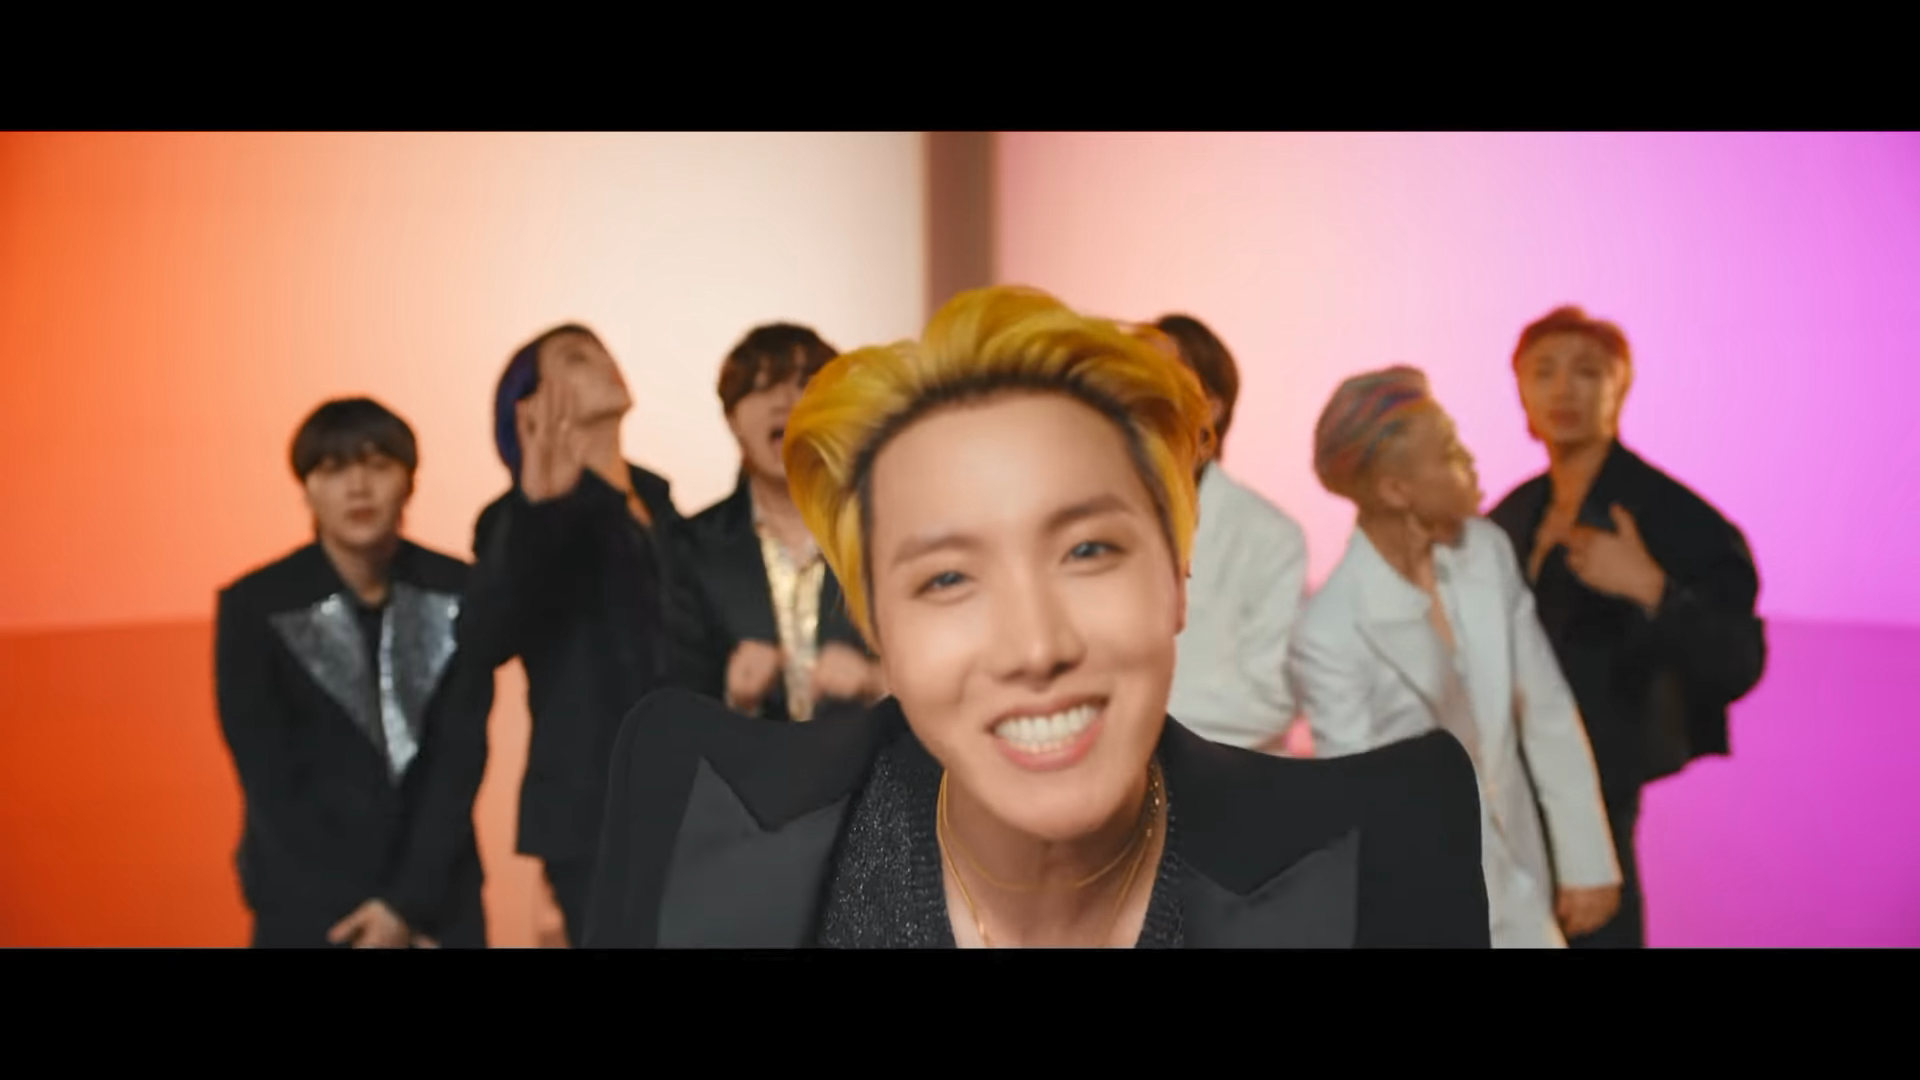 BTS J-Hope's Blue Hair in "Butter" Music Video - wide 2